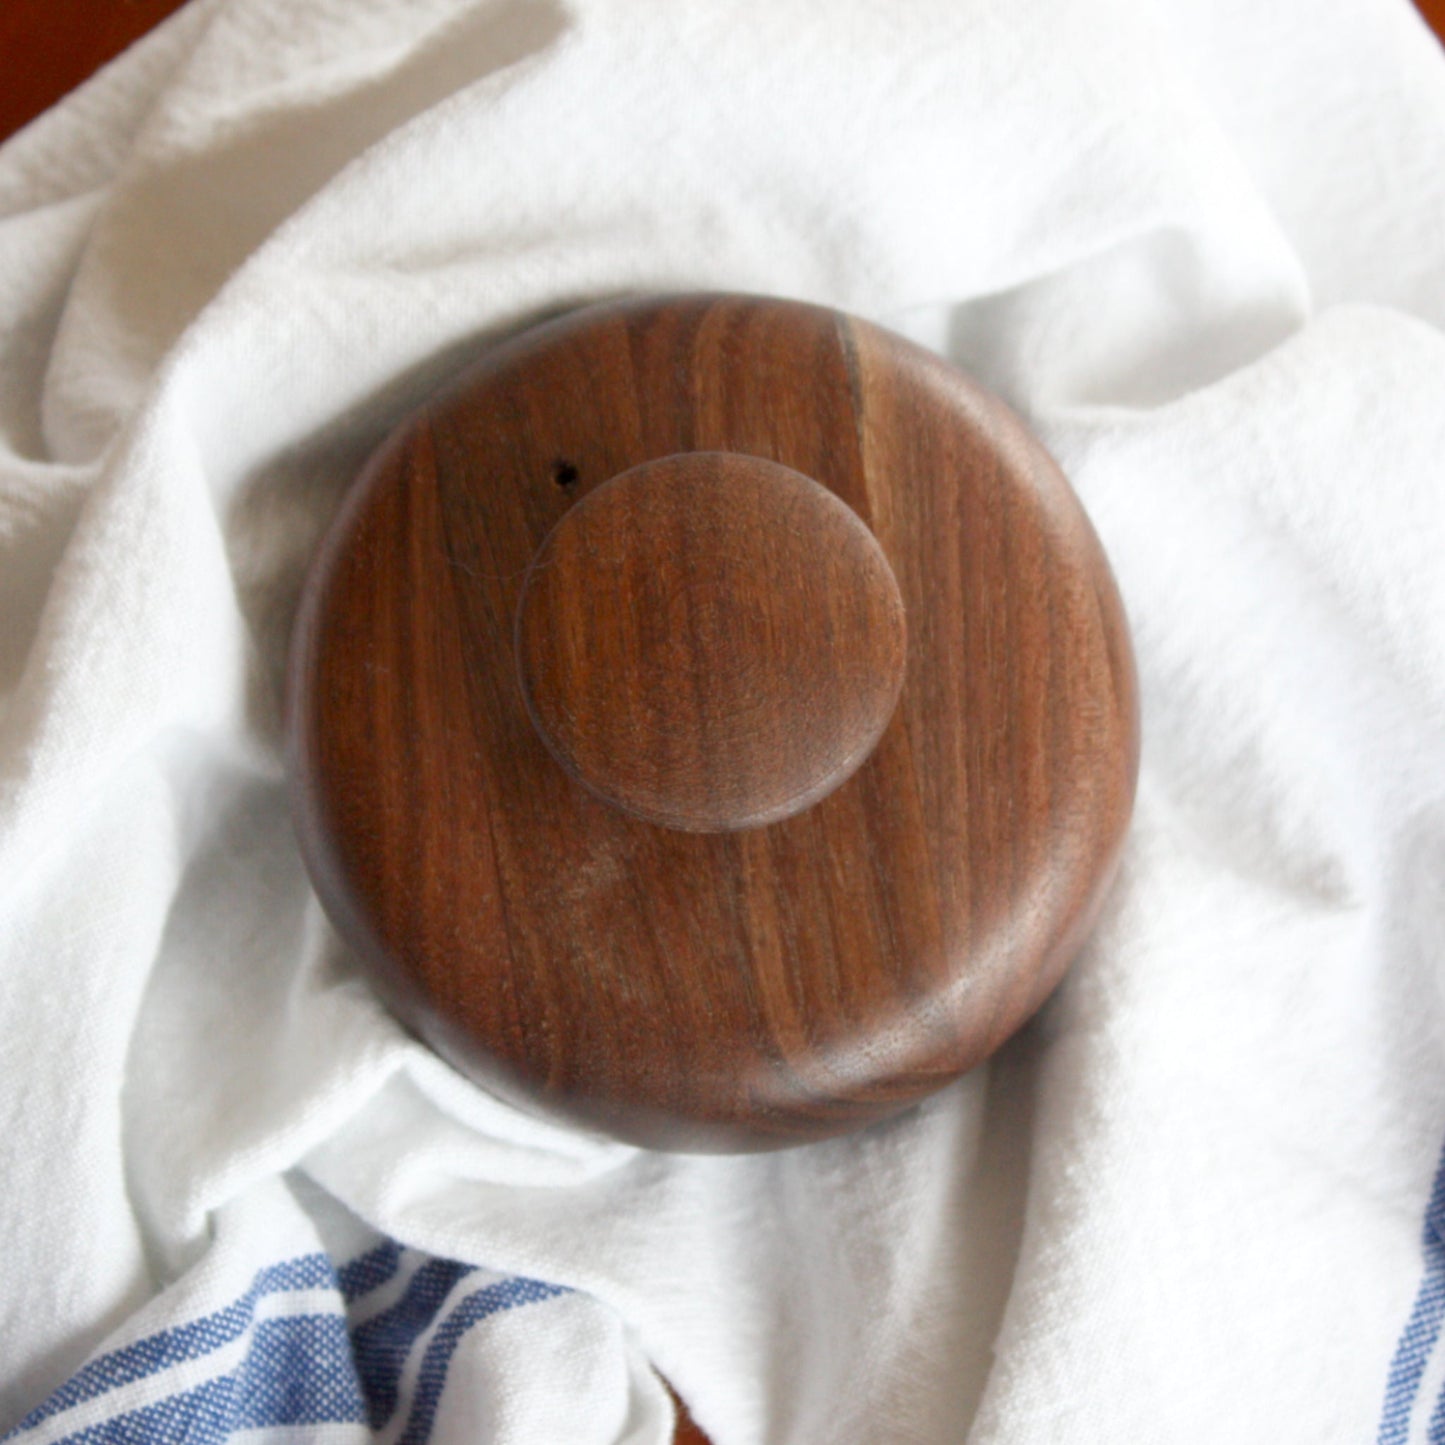 Cathead Biscuit Cutter - Black Walnut - Made in the USA